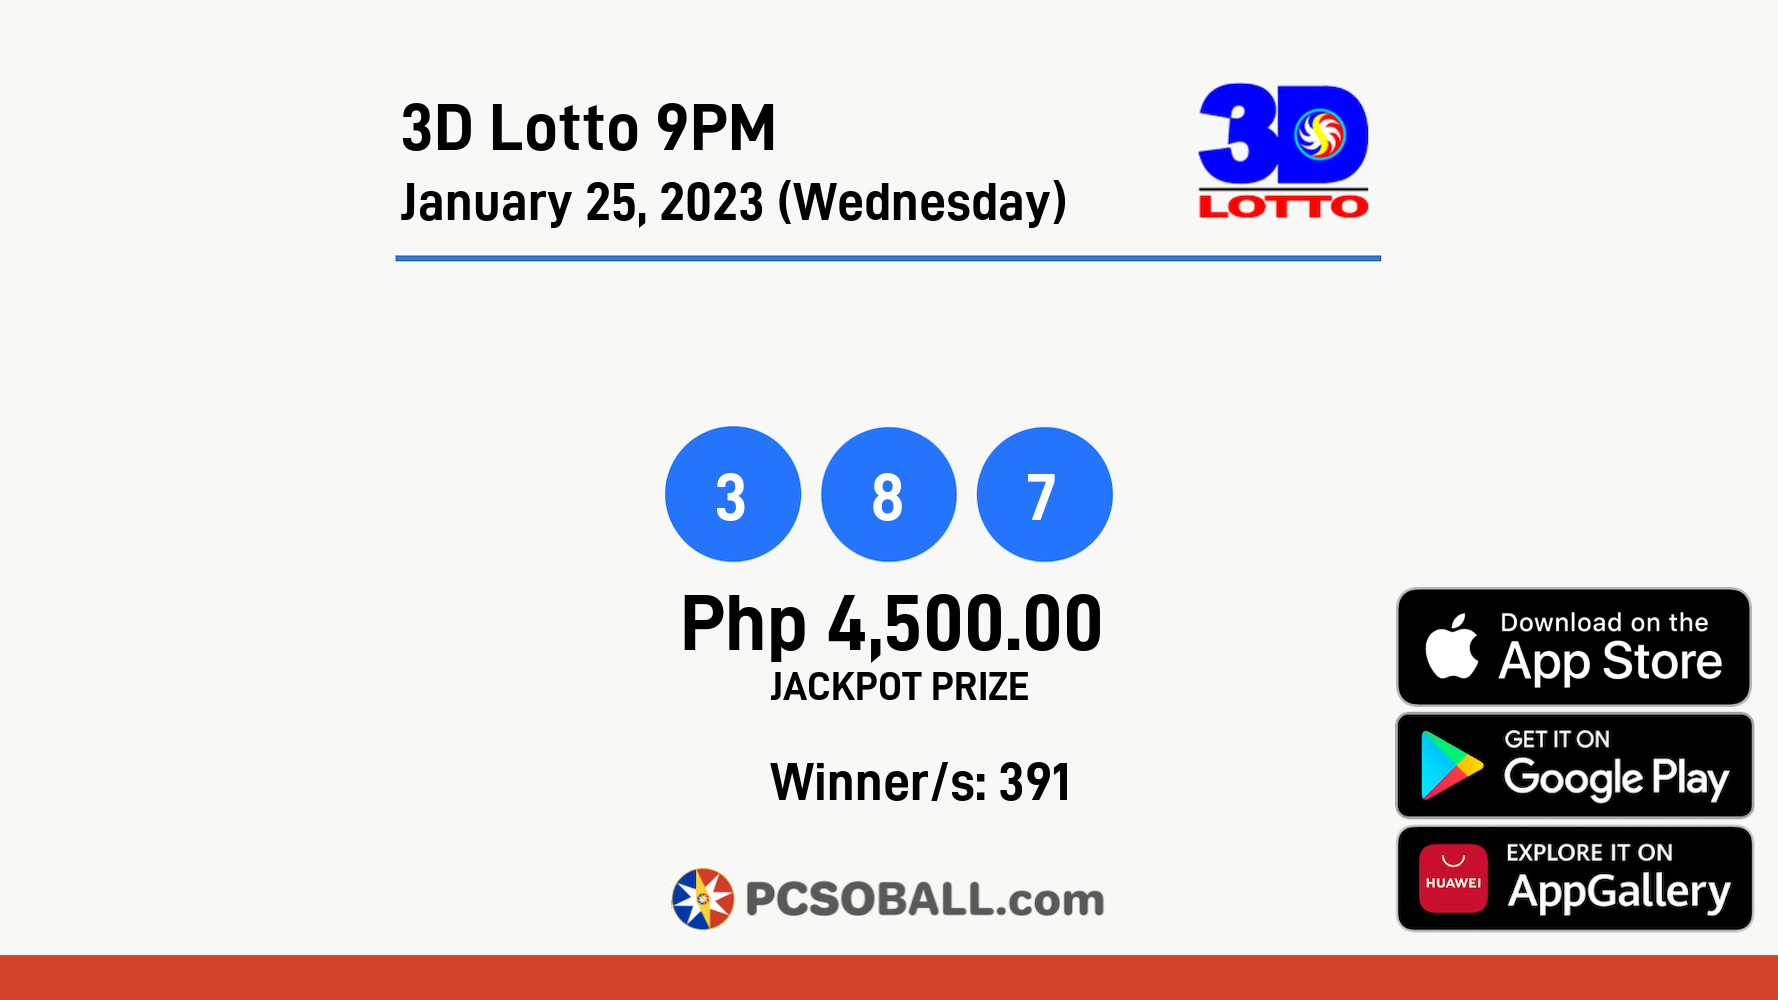 3D Lotto 9PM January 25, 2023 (Wednesday) Result